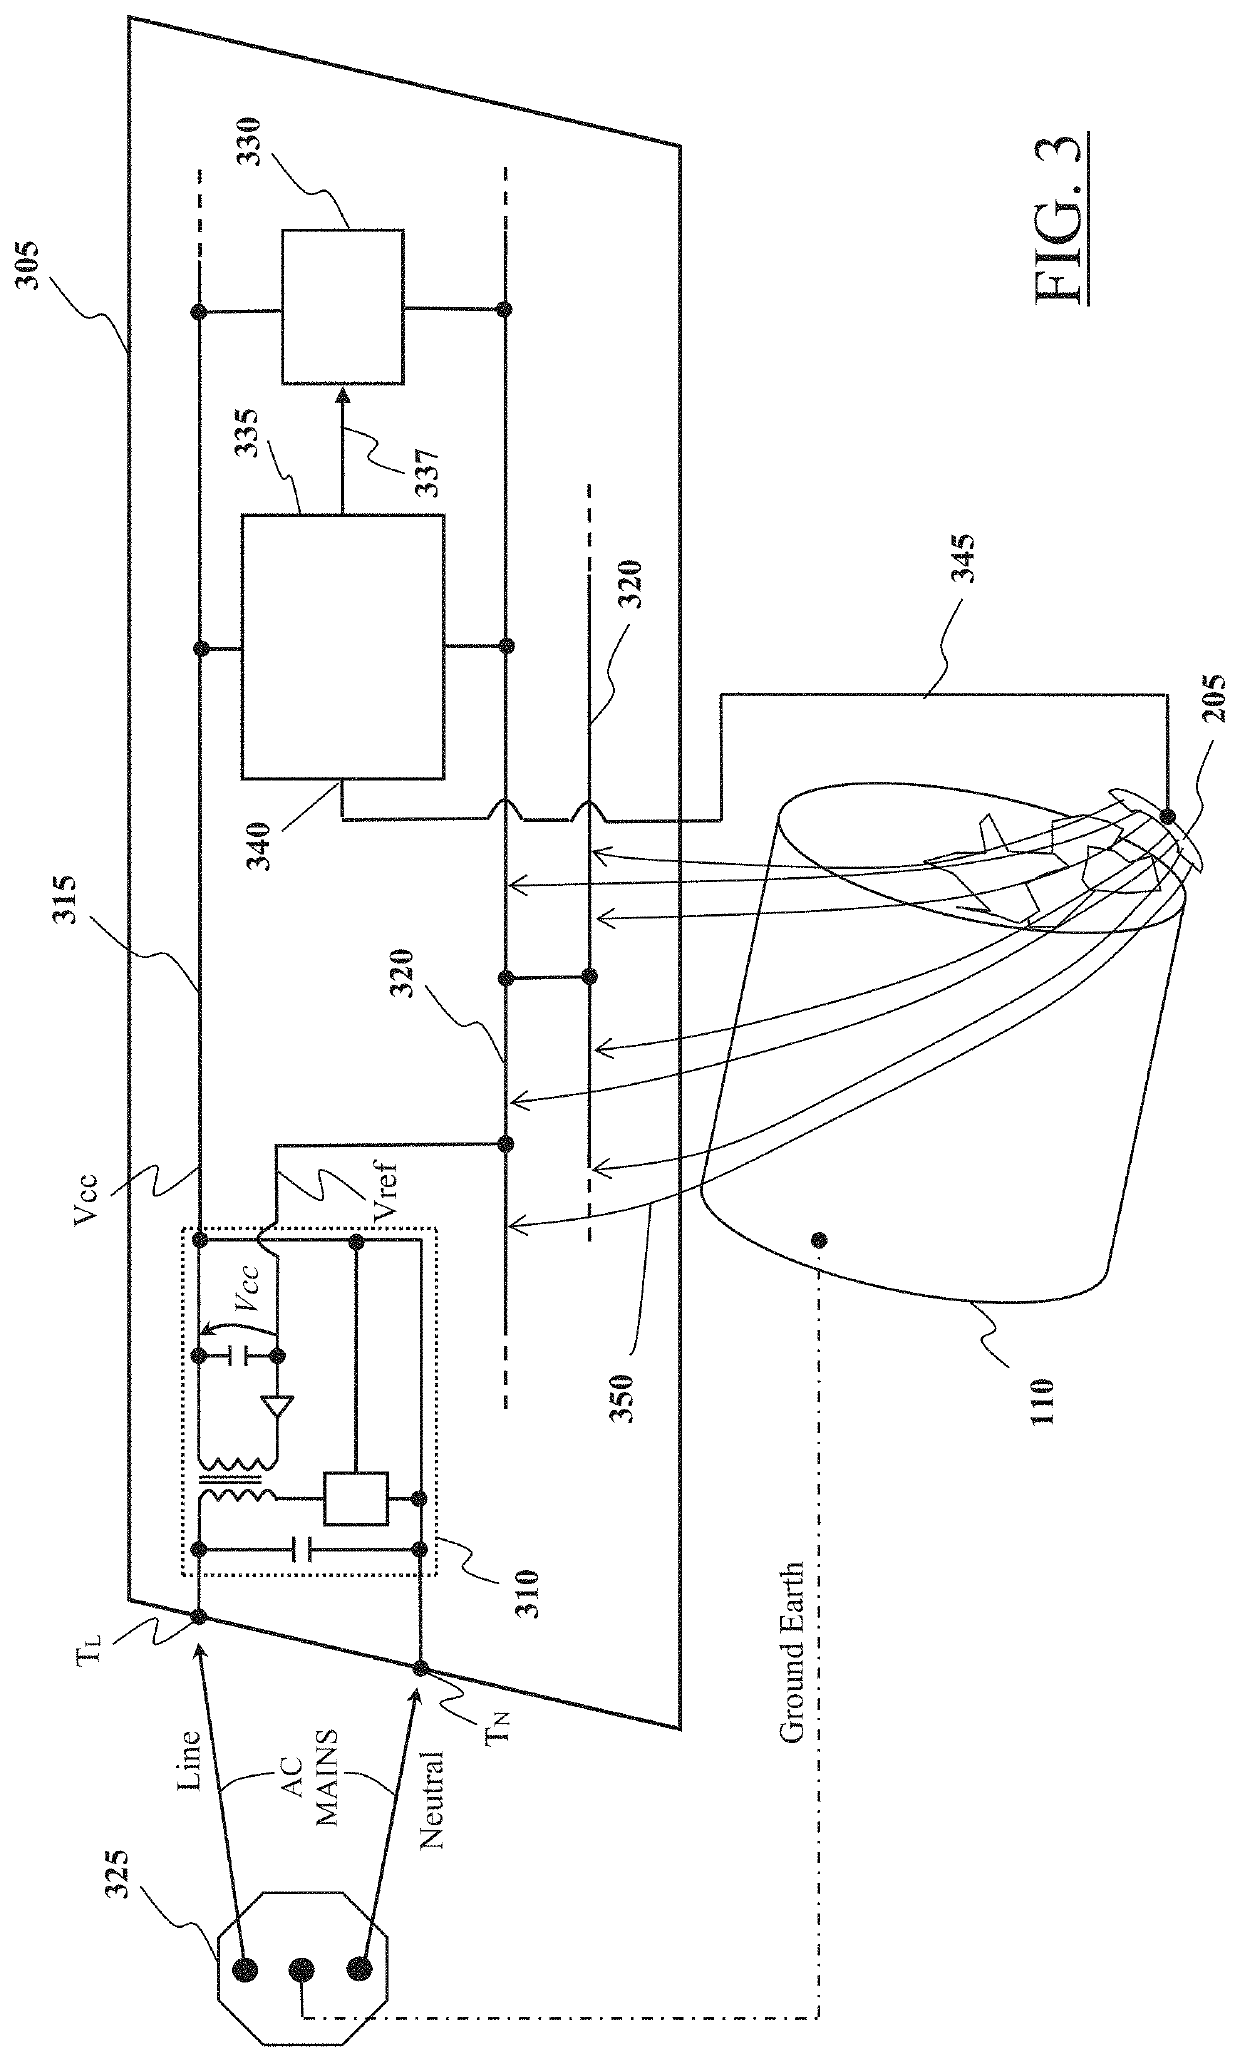 Laundry appliance with capacitive laundry drying degree sensing function